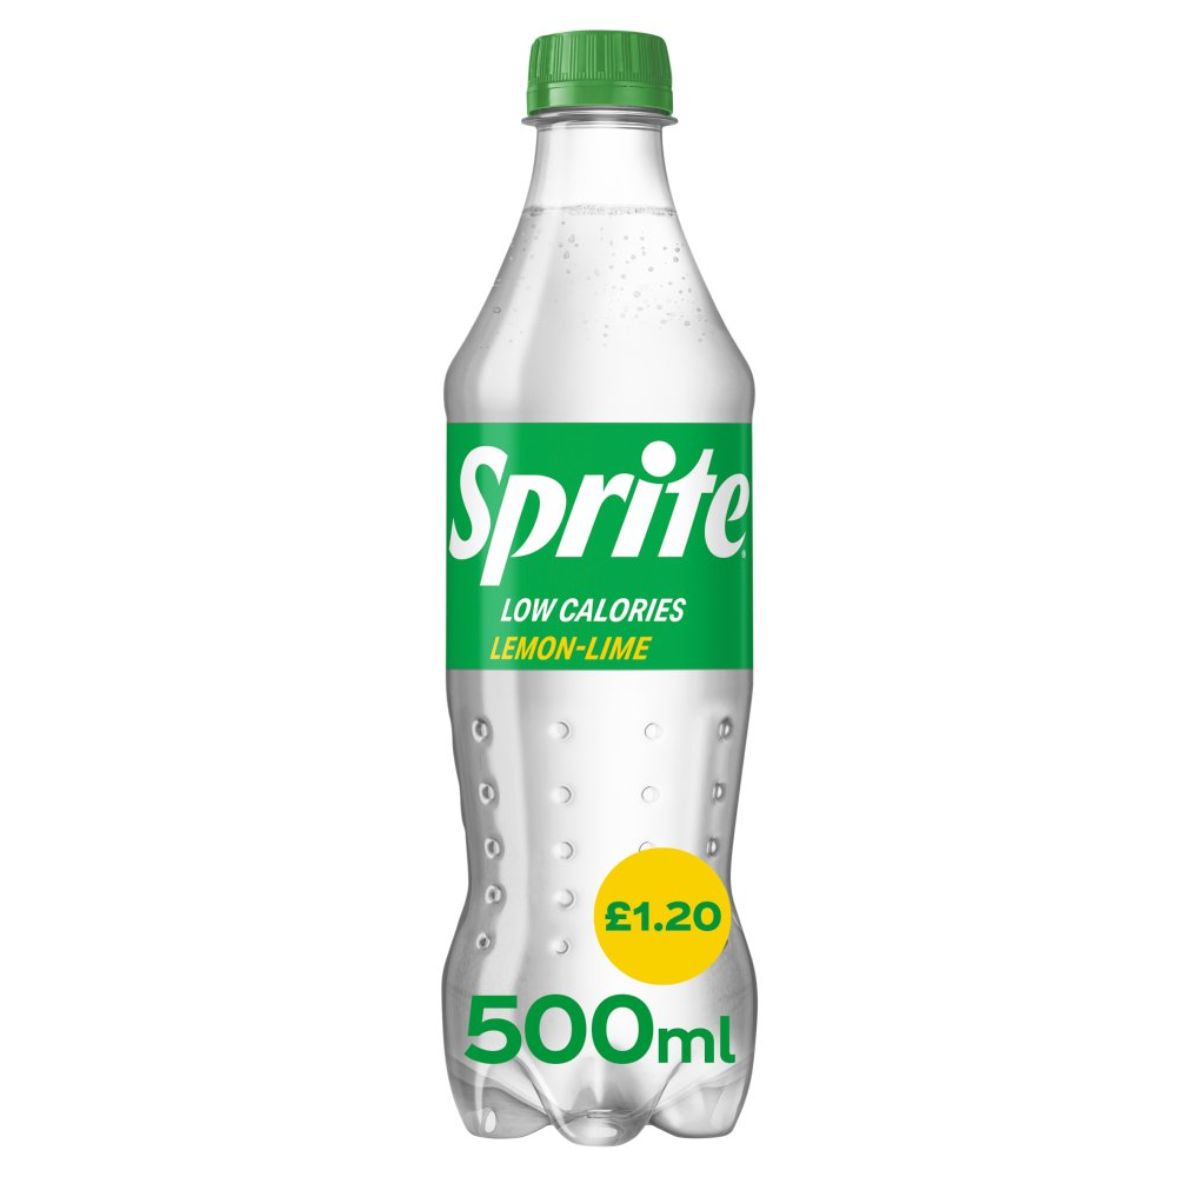 A bottle of Sprite - Original - 500ml on a white background.